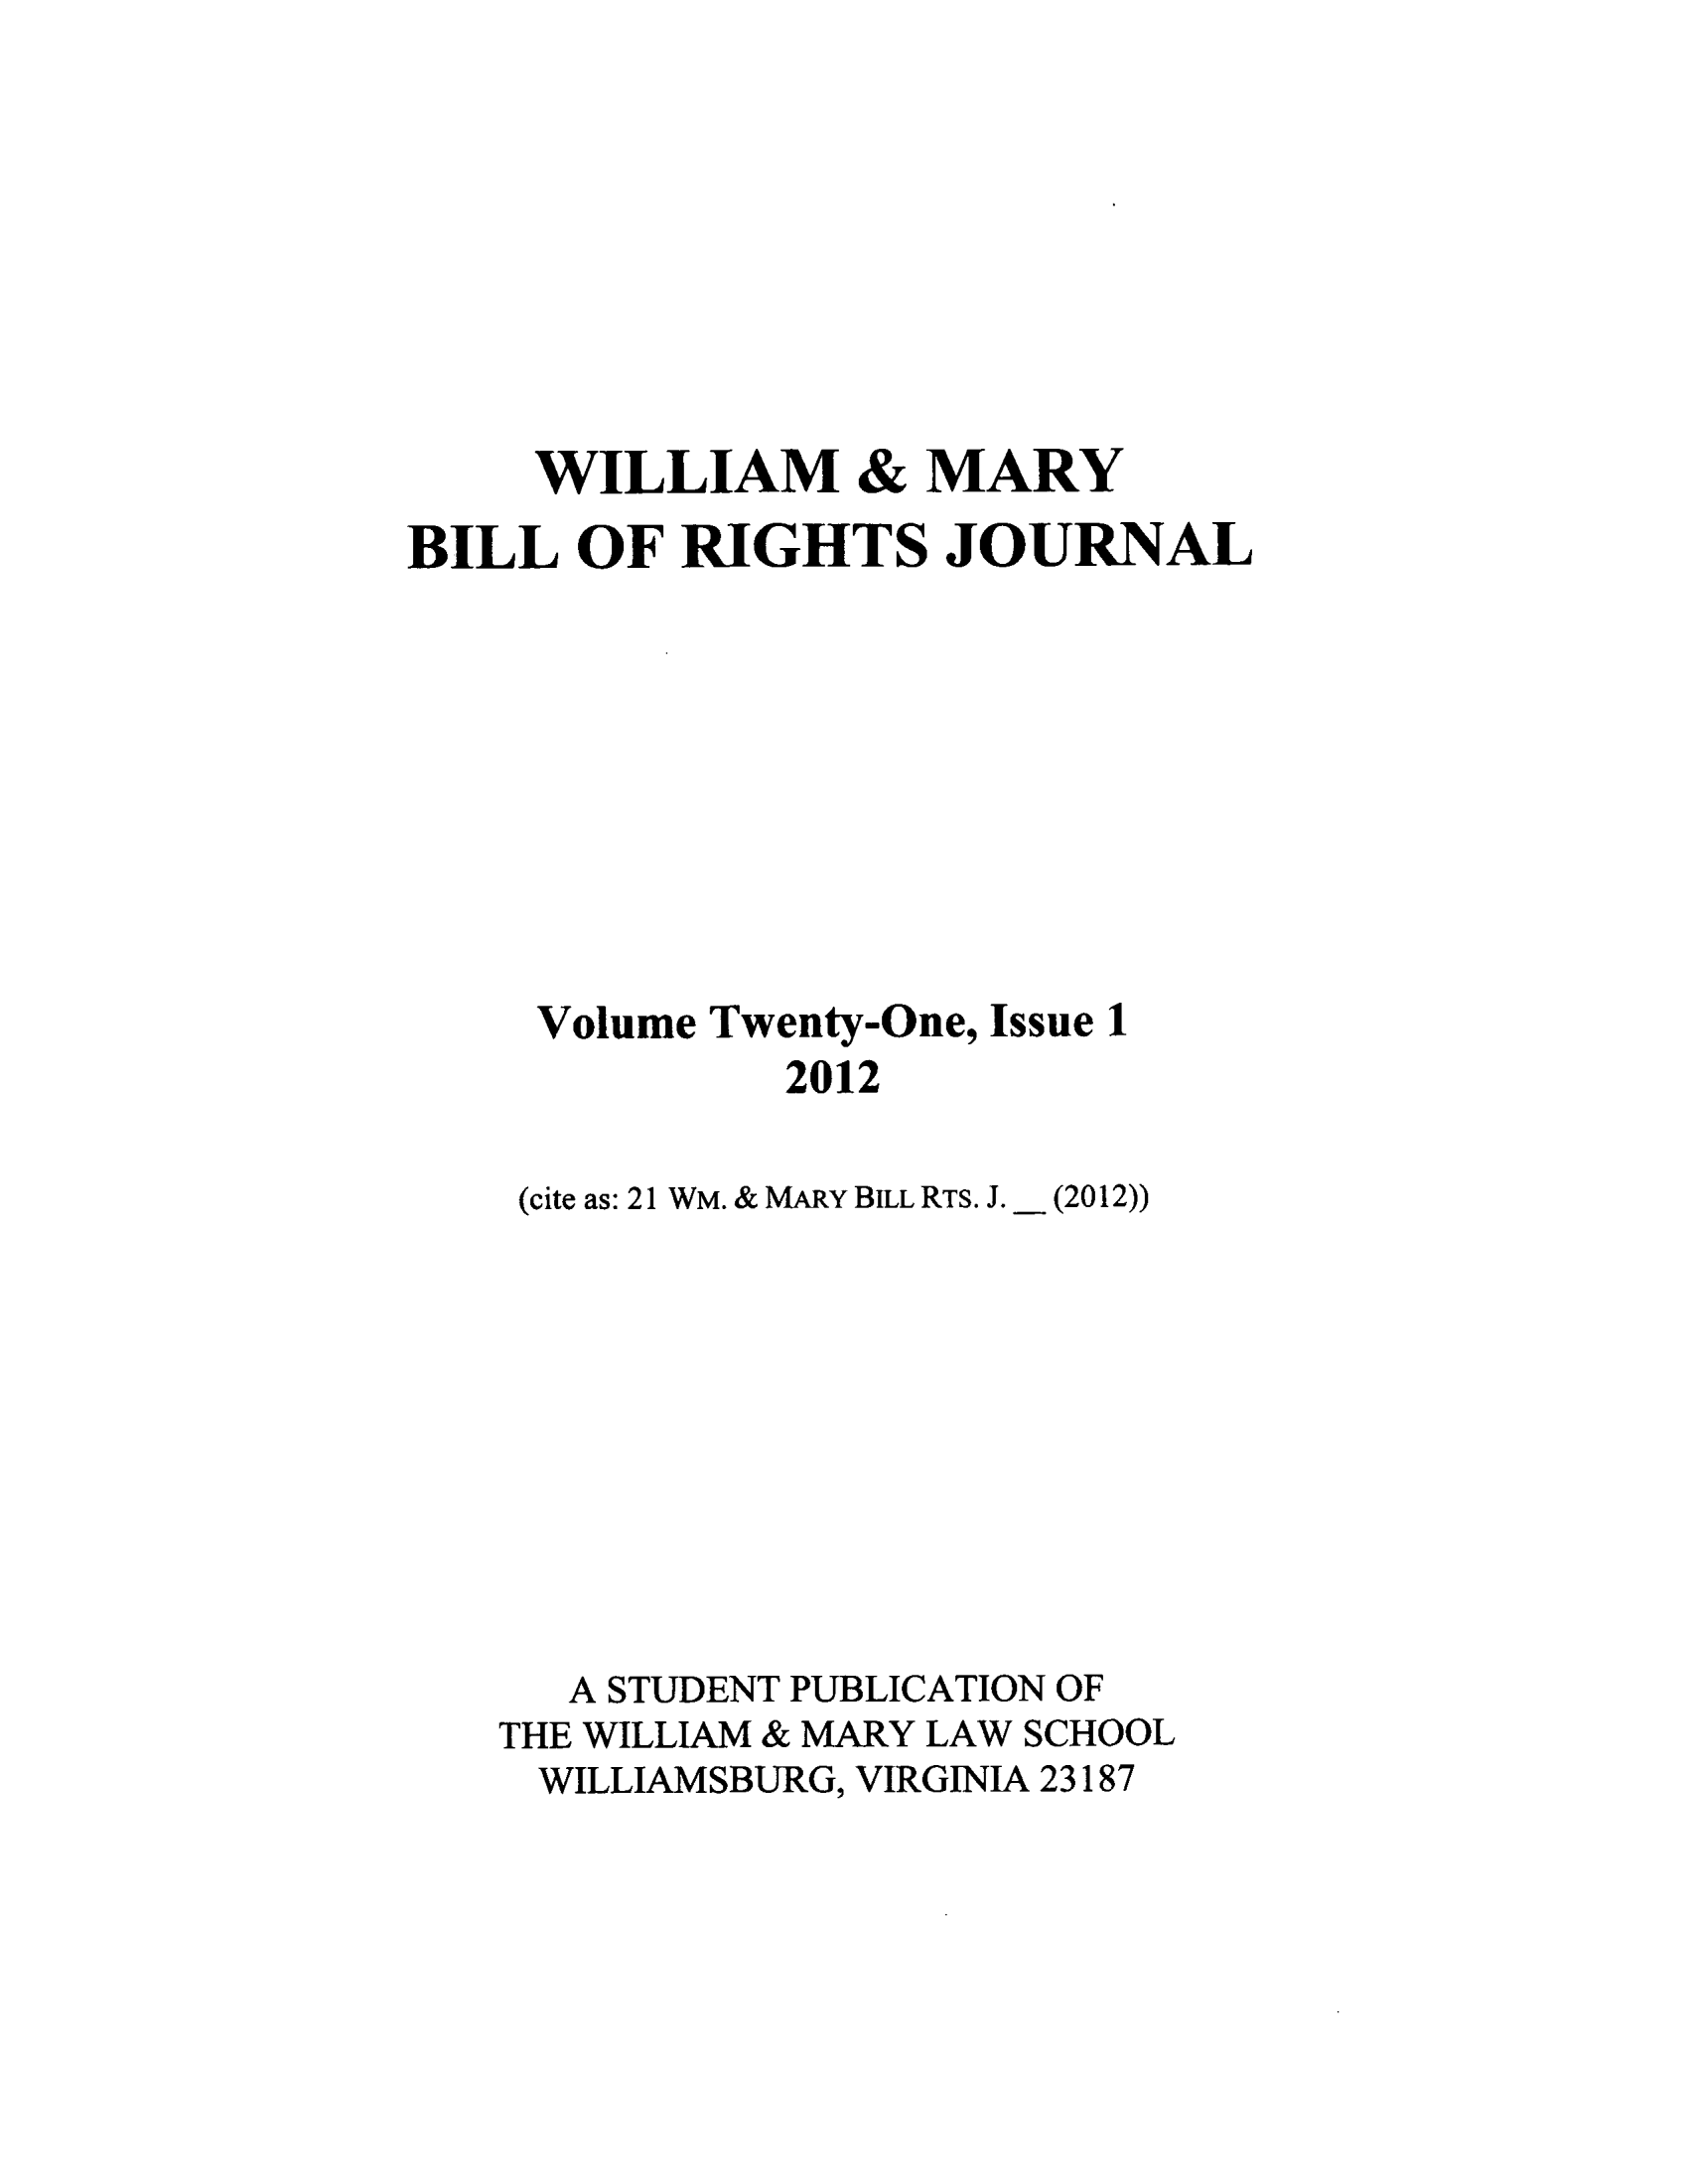 handle is hein.journals/wmbrts21 and id is 1 raw text is: WILLIAM & MARY
BILL OF RIGHTS JOURNAL
Volume Twenty-One, Issue 1
2012
(cite as: 21 WM. & MARY BILL RTS. J. _ (2012))

A STUDENT PUBLICATION OF
THE WILLIAM & MARY LAW SCHOOL
WILLIAMSBURG, VIRGINIA 23187


